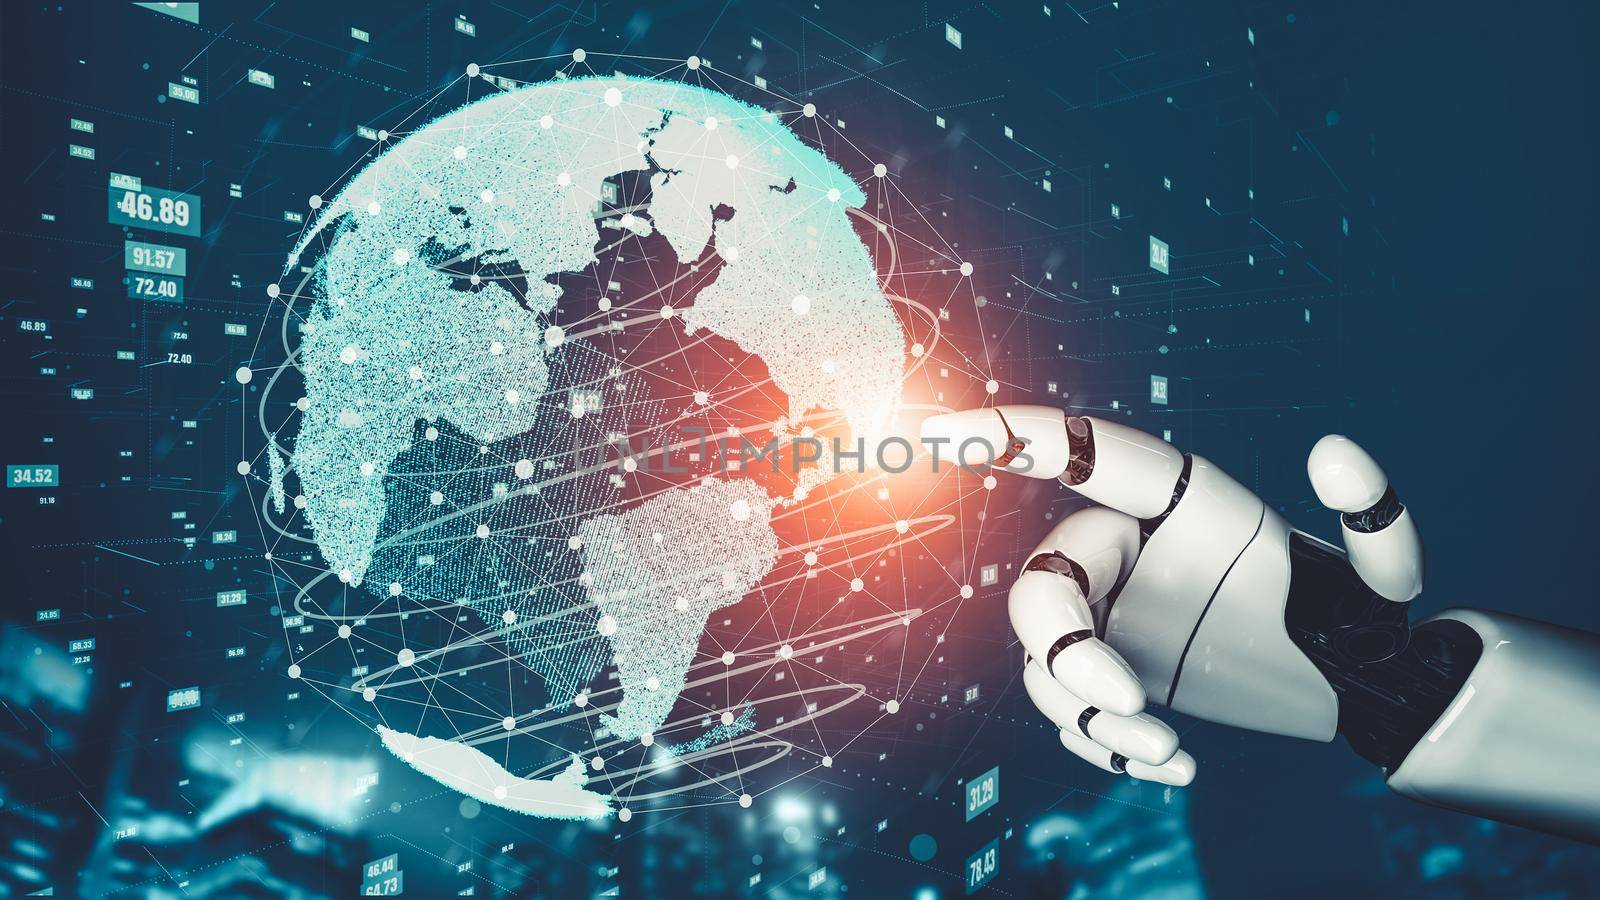 Futuristic robot artificial intelligence revolutionary AI technology development and machine learning concept. Global robotic bionic science research for future of human life. 3D rendering graphic.